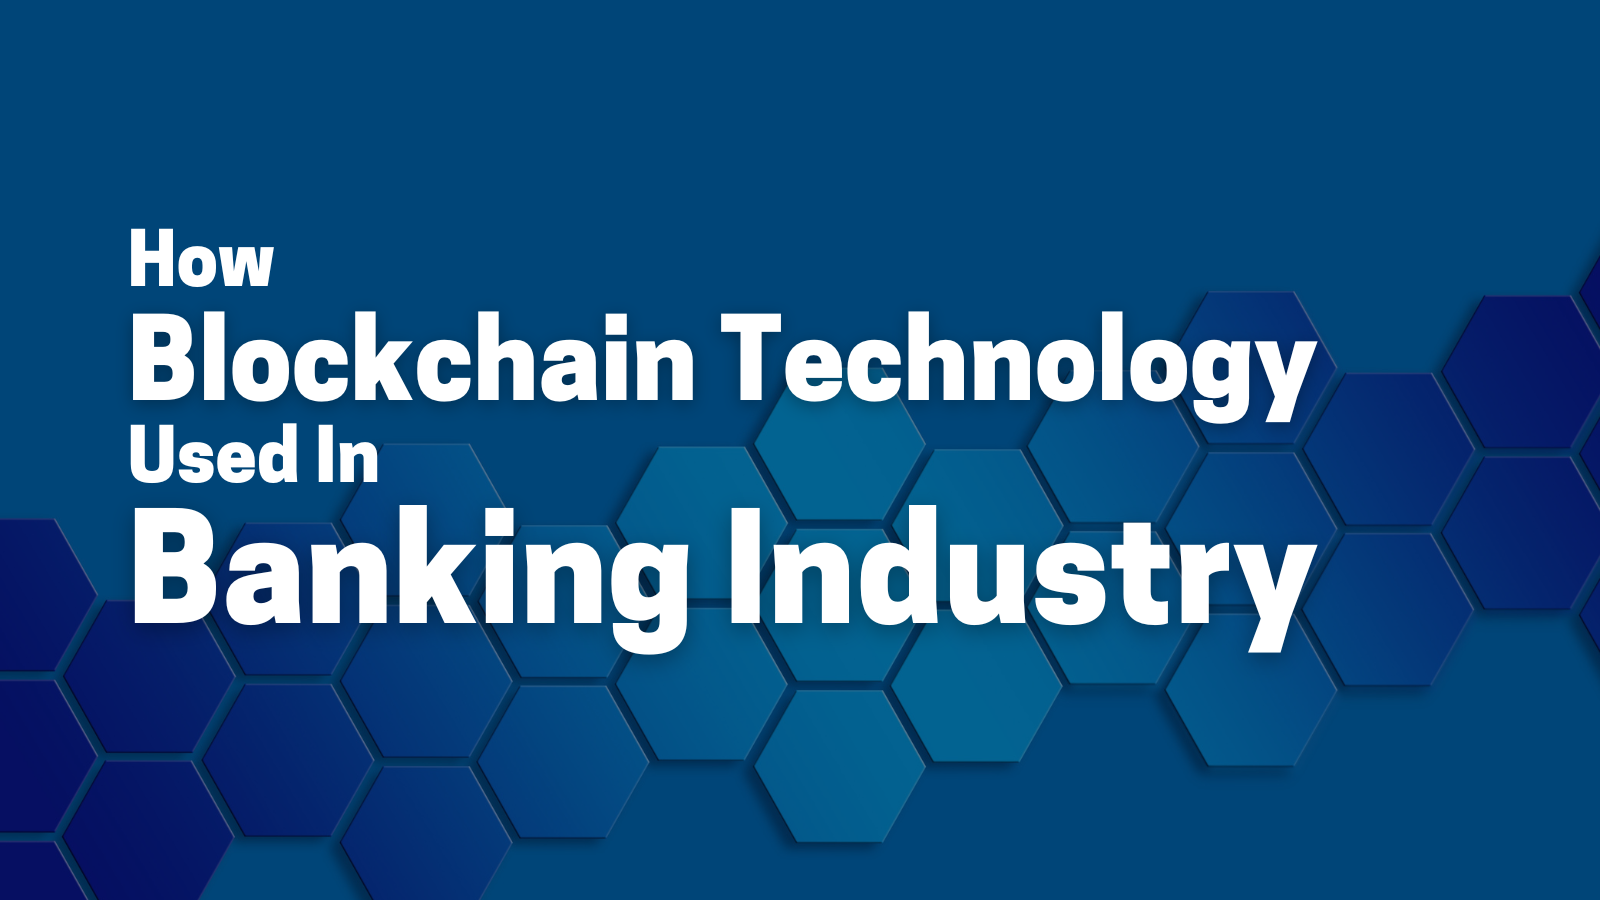 How Blockchain Technology Used In Banking Industry